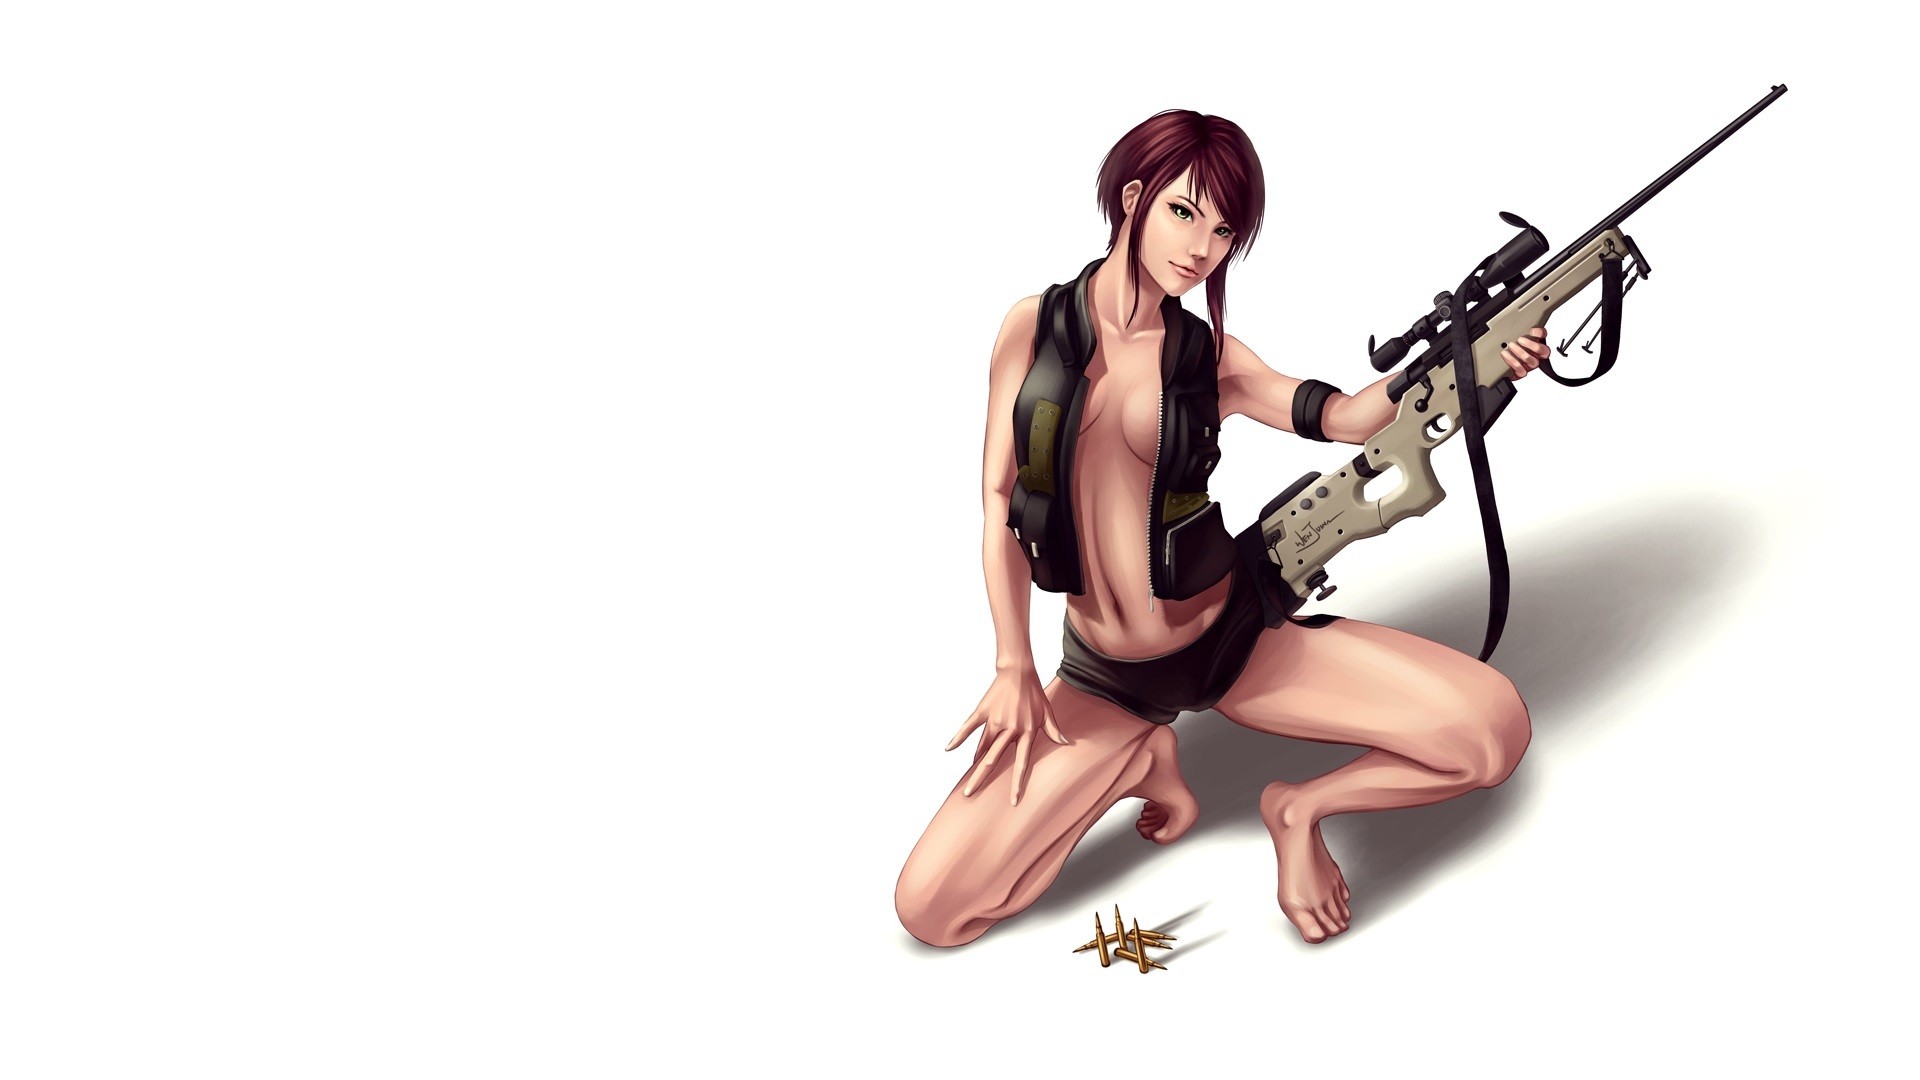 General 1920x1080 artwork sniper rifle kneeling simple background white background panties boobs weapon Remington 700 bipod telescopic sight spread legs girls with guns barefoot ammunition belly pants women American firearms